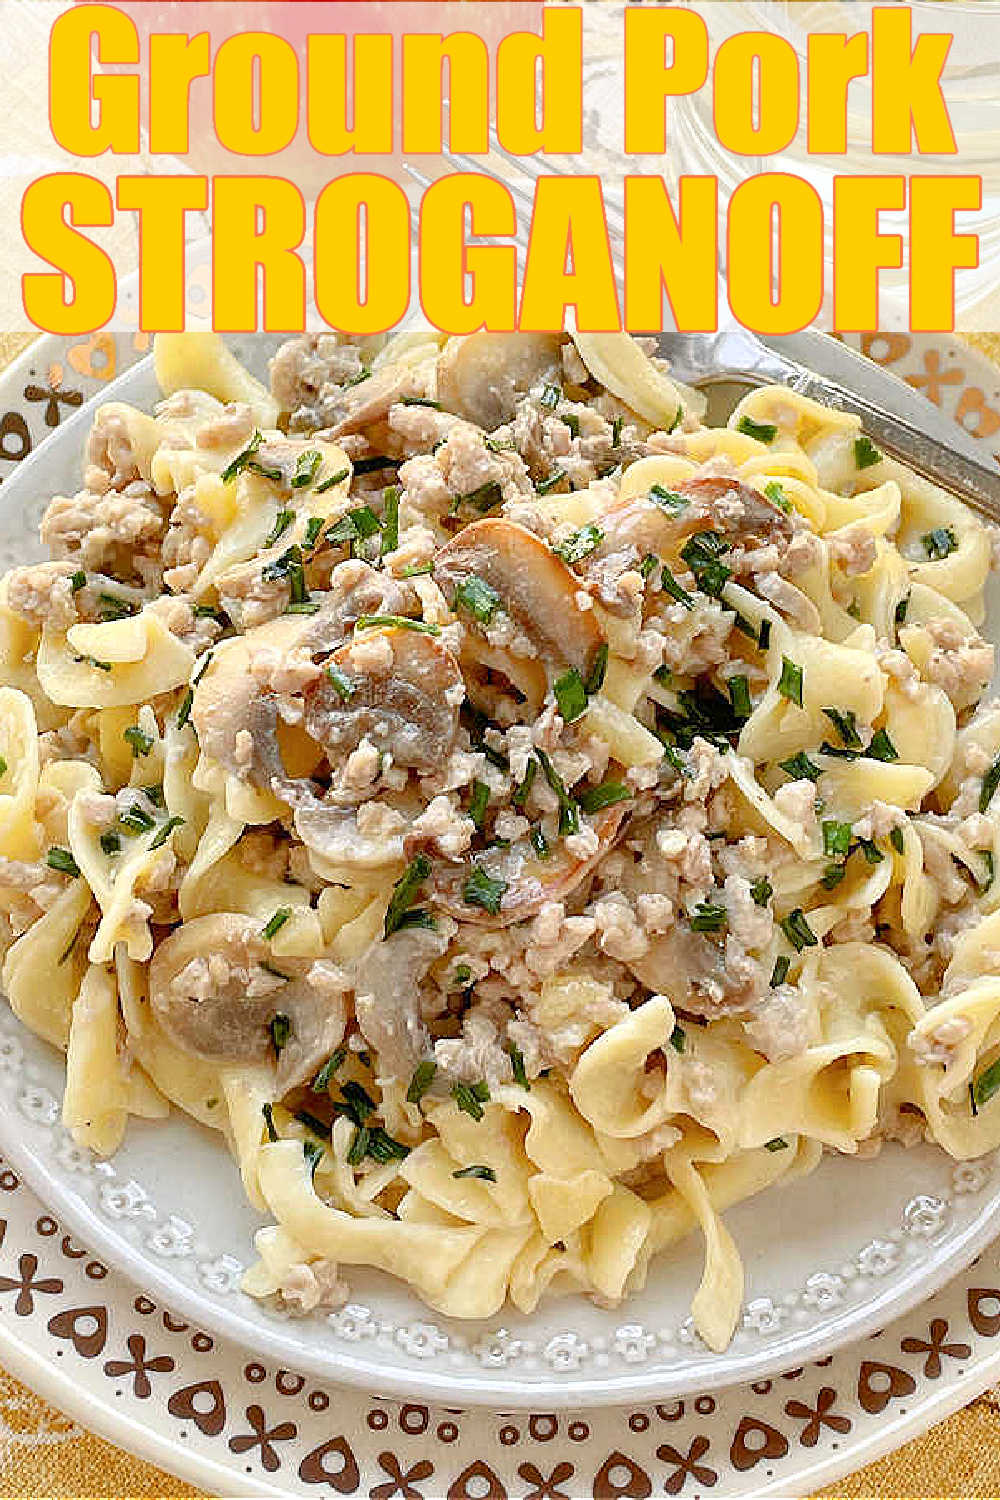 Pork Stroganoff is quick, creamy, comfort food with a lighter twist. Tender pork combines with buttery mushrooms and sweet apples in a tangy sour cream sauce. via @foodtasticmom